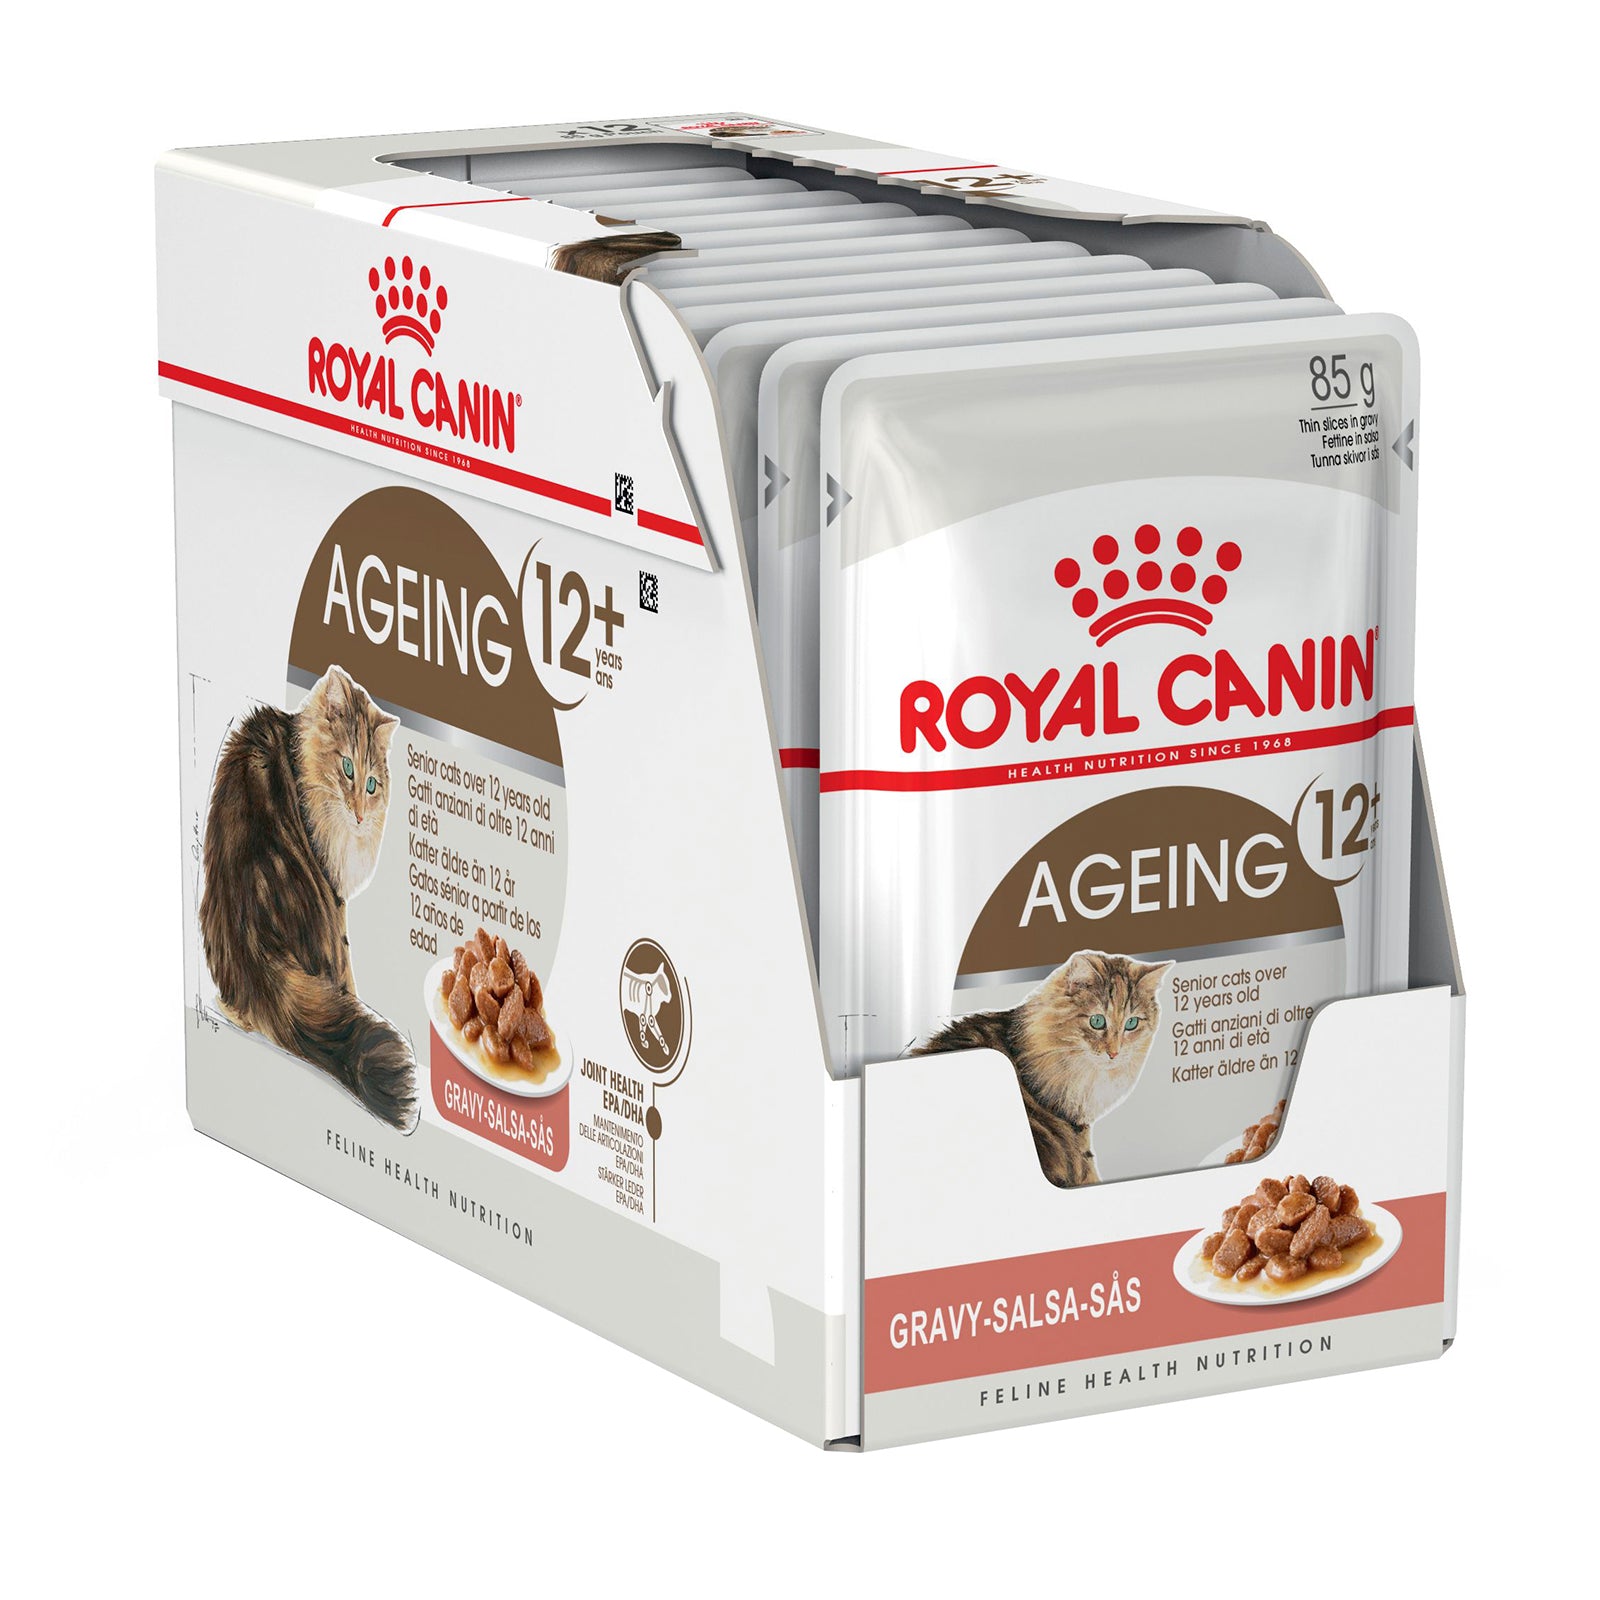 Royal Canin Cat Food Pouch Ageing 12+ Gravy